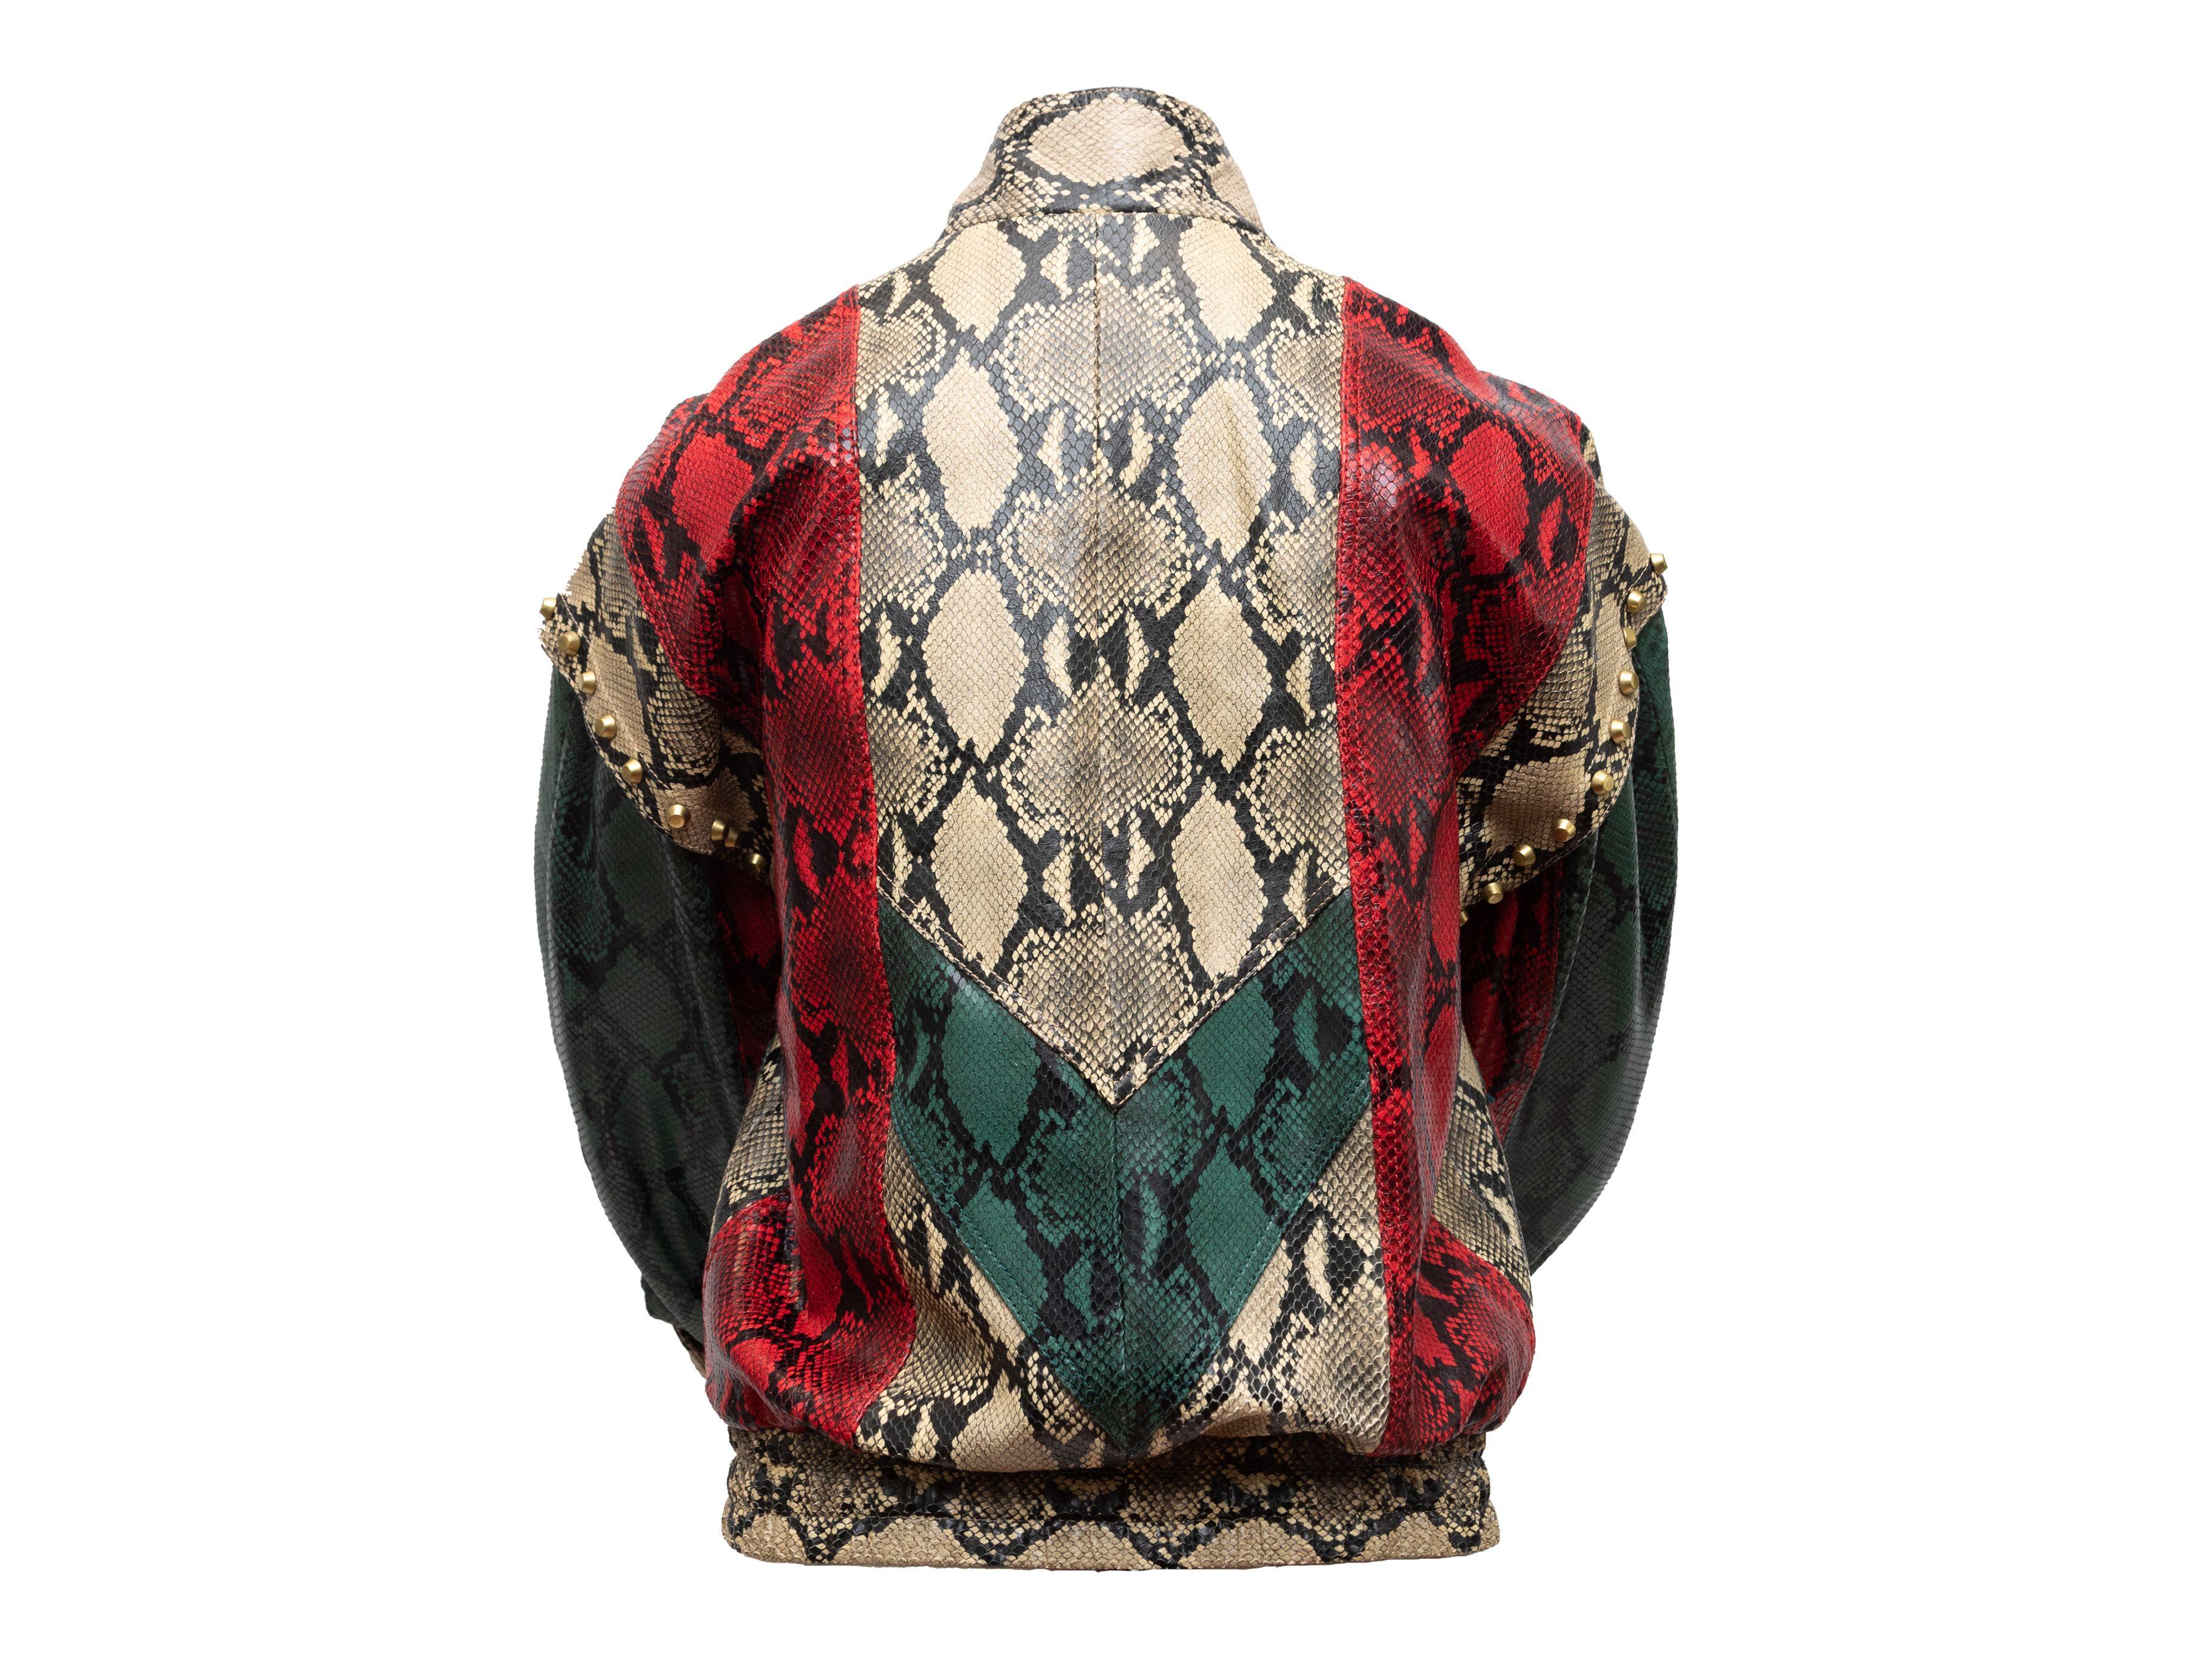 Gucci Tan & Multicolor Python Printed Leather Bomber Jacket 2